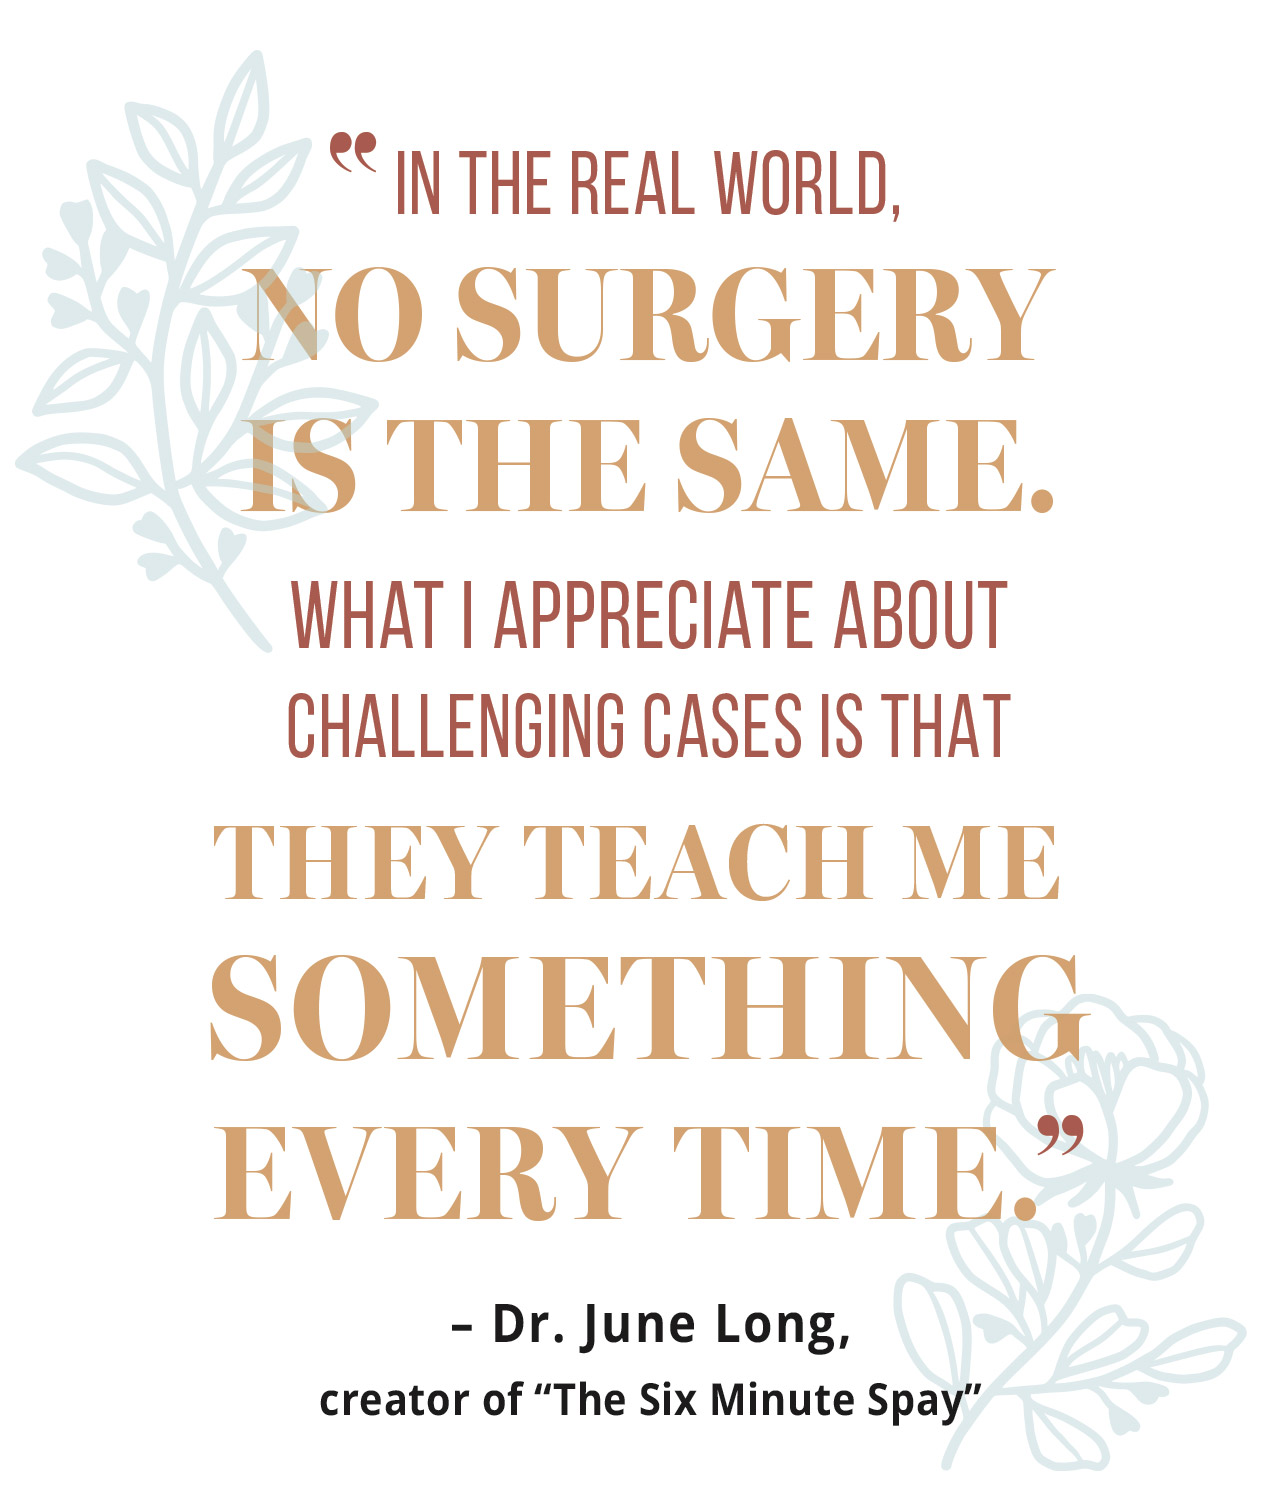 "IN THE REAL WORLD, NO SURGERY IS THE SAME. WHAT I APPRECIATE ABOUT CHALLENGING CASES IS THAT THEY TEACH ME SOMETHING EVERY TIME." typographic quote